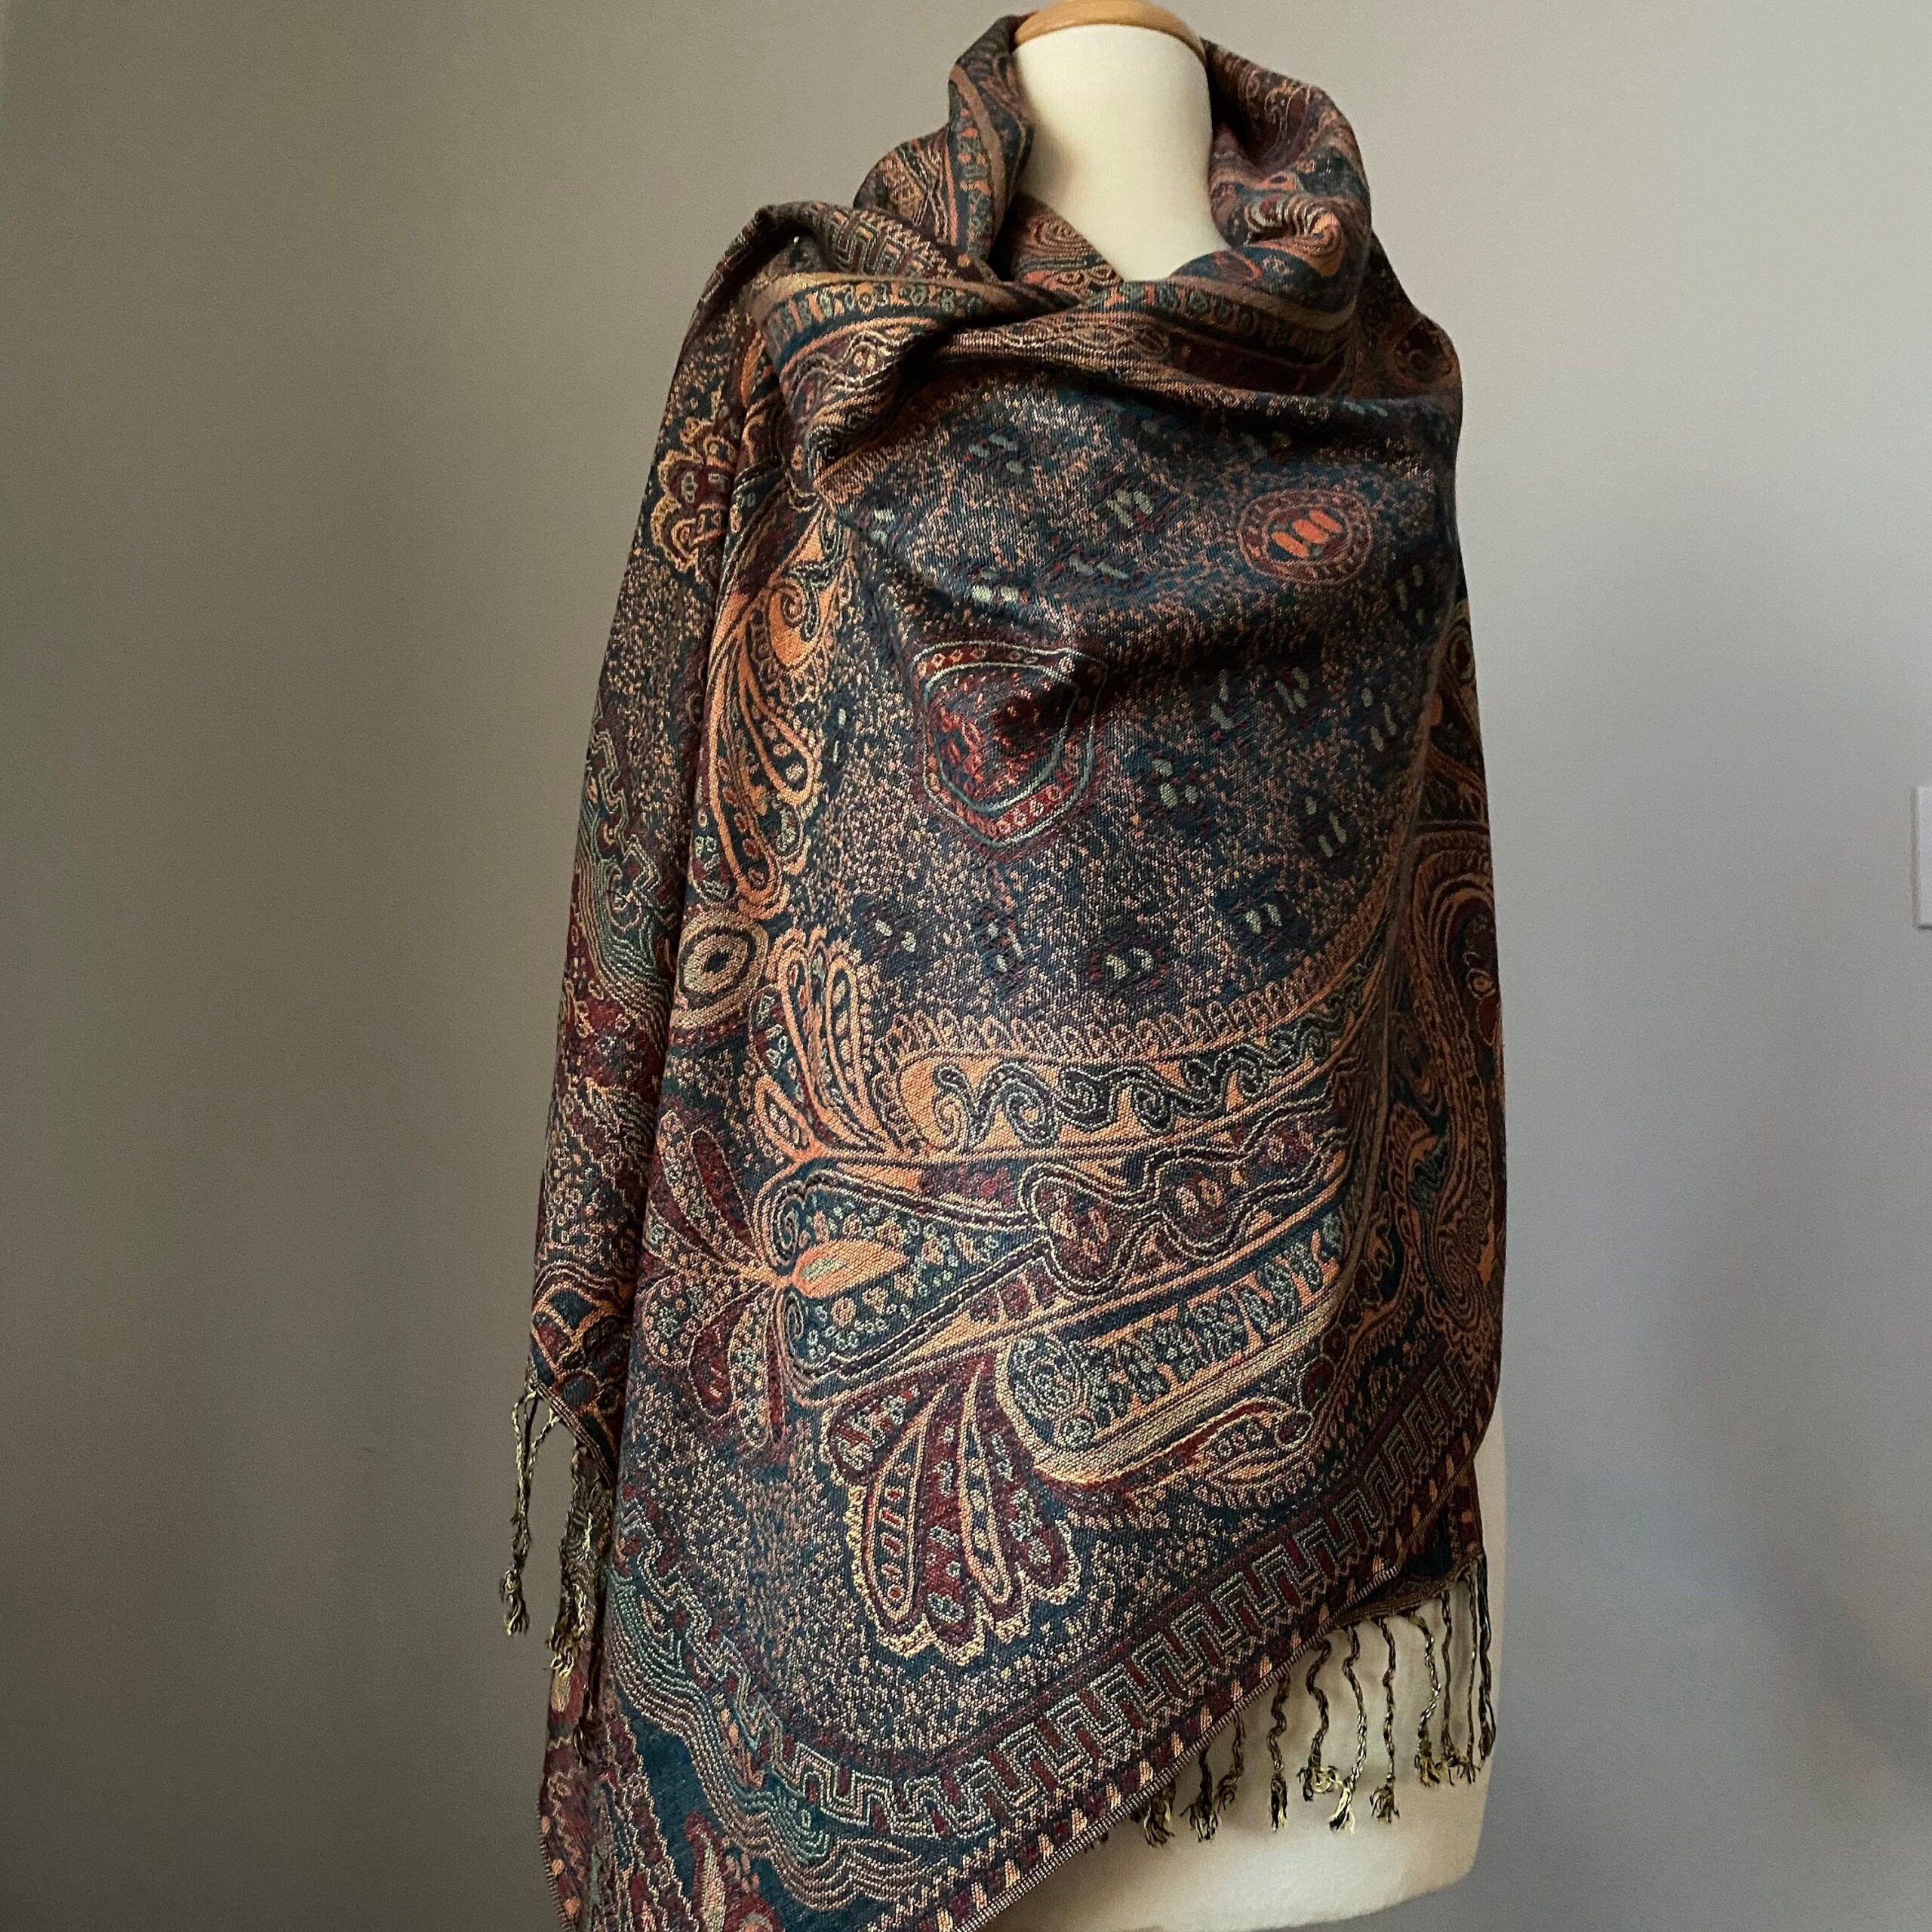 The History and Craftsmanship of the
Pashmina Shawl